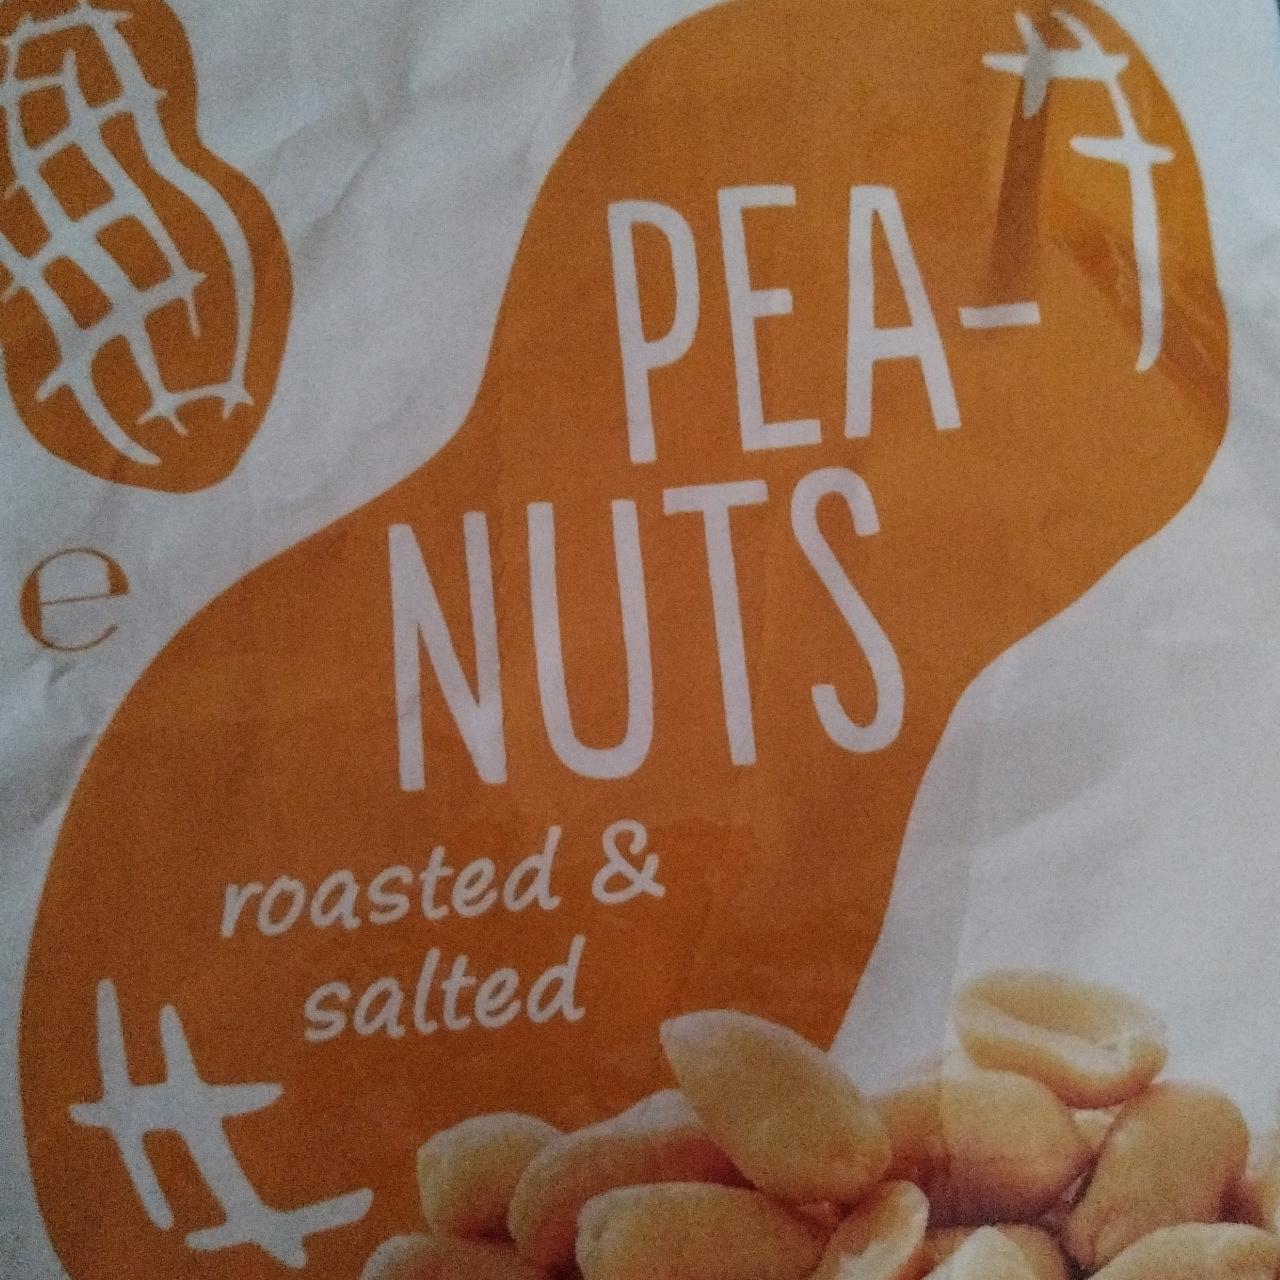 Fotografie - Peanuts roasted & salted Clever